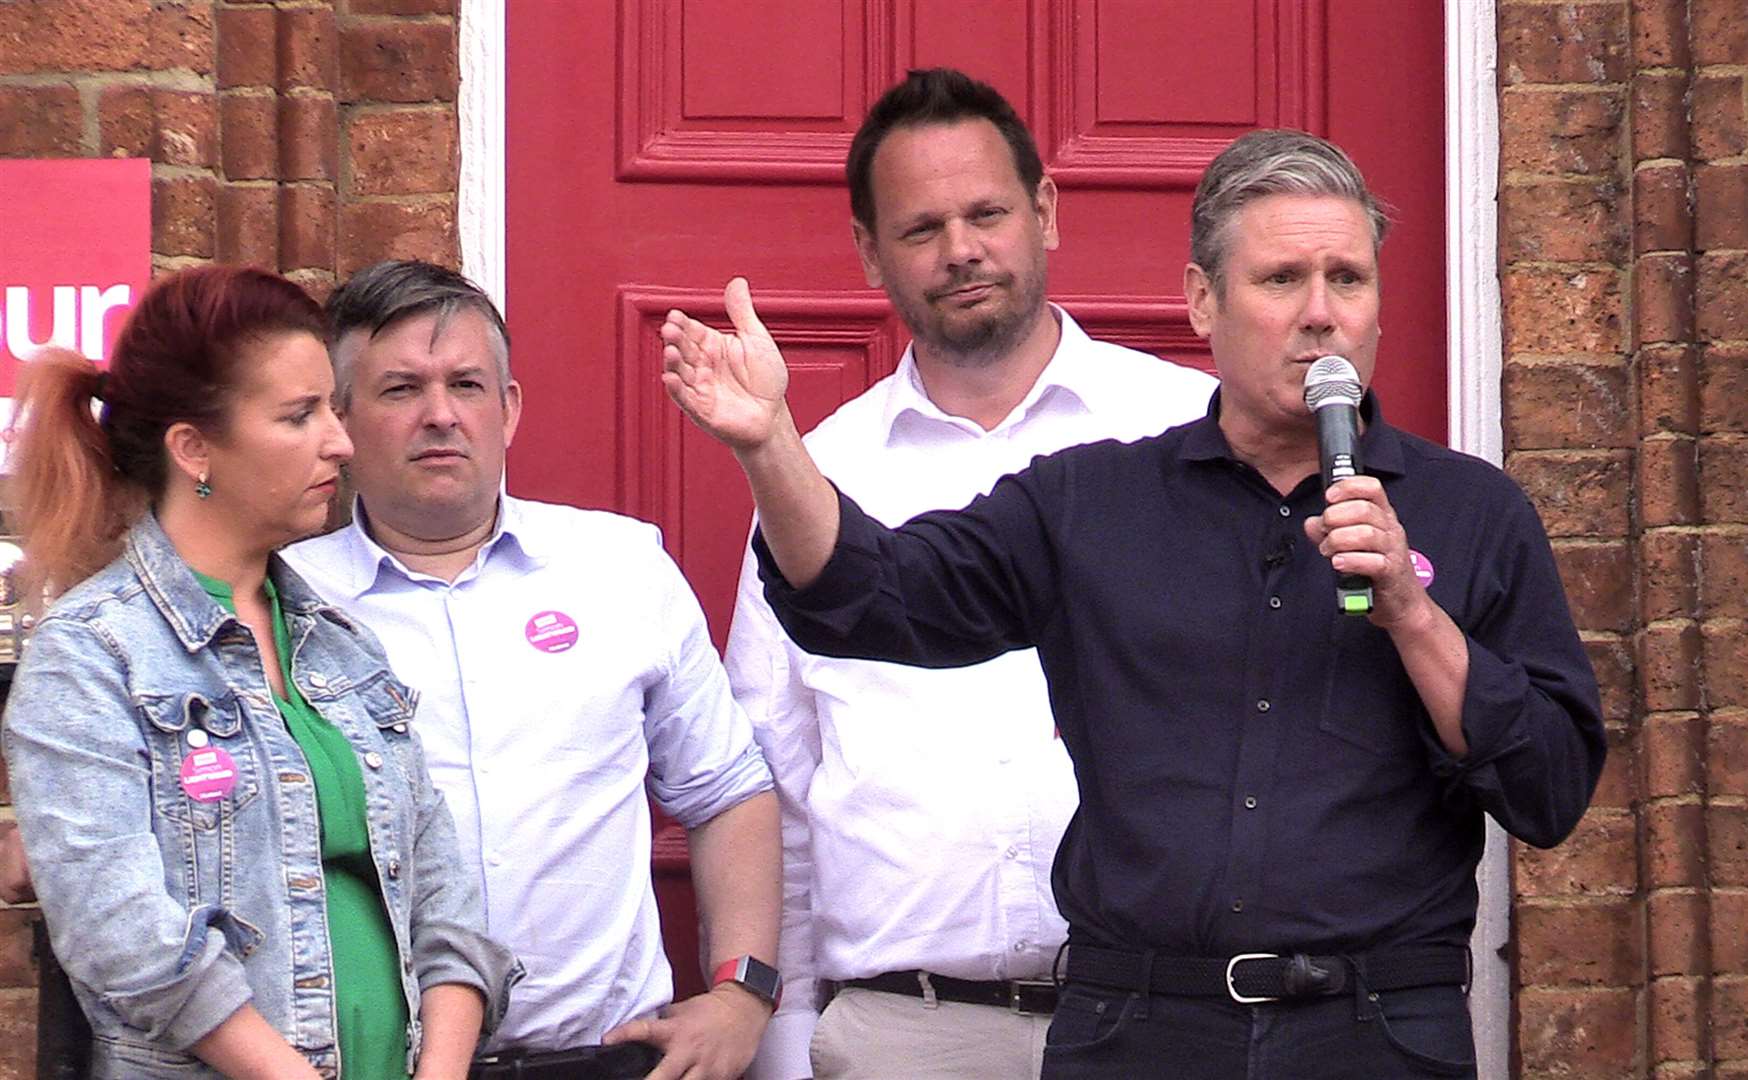 Labour leader Sir Keir Starmer told supporters in Wakefield that a victory there could herald the next Labour government (Dave Higgens/PA)